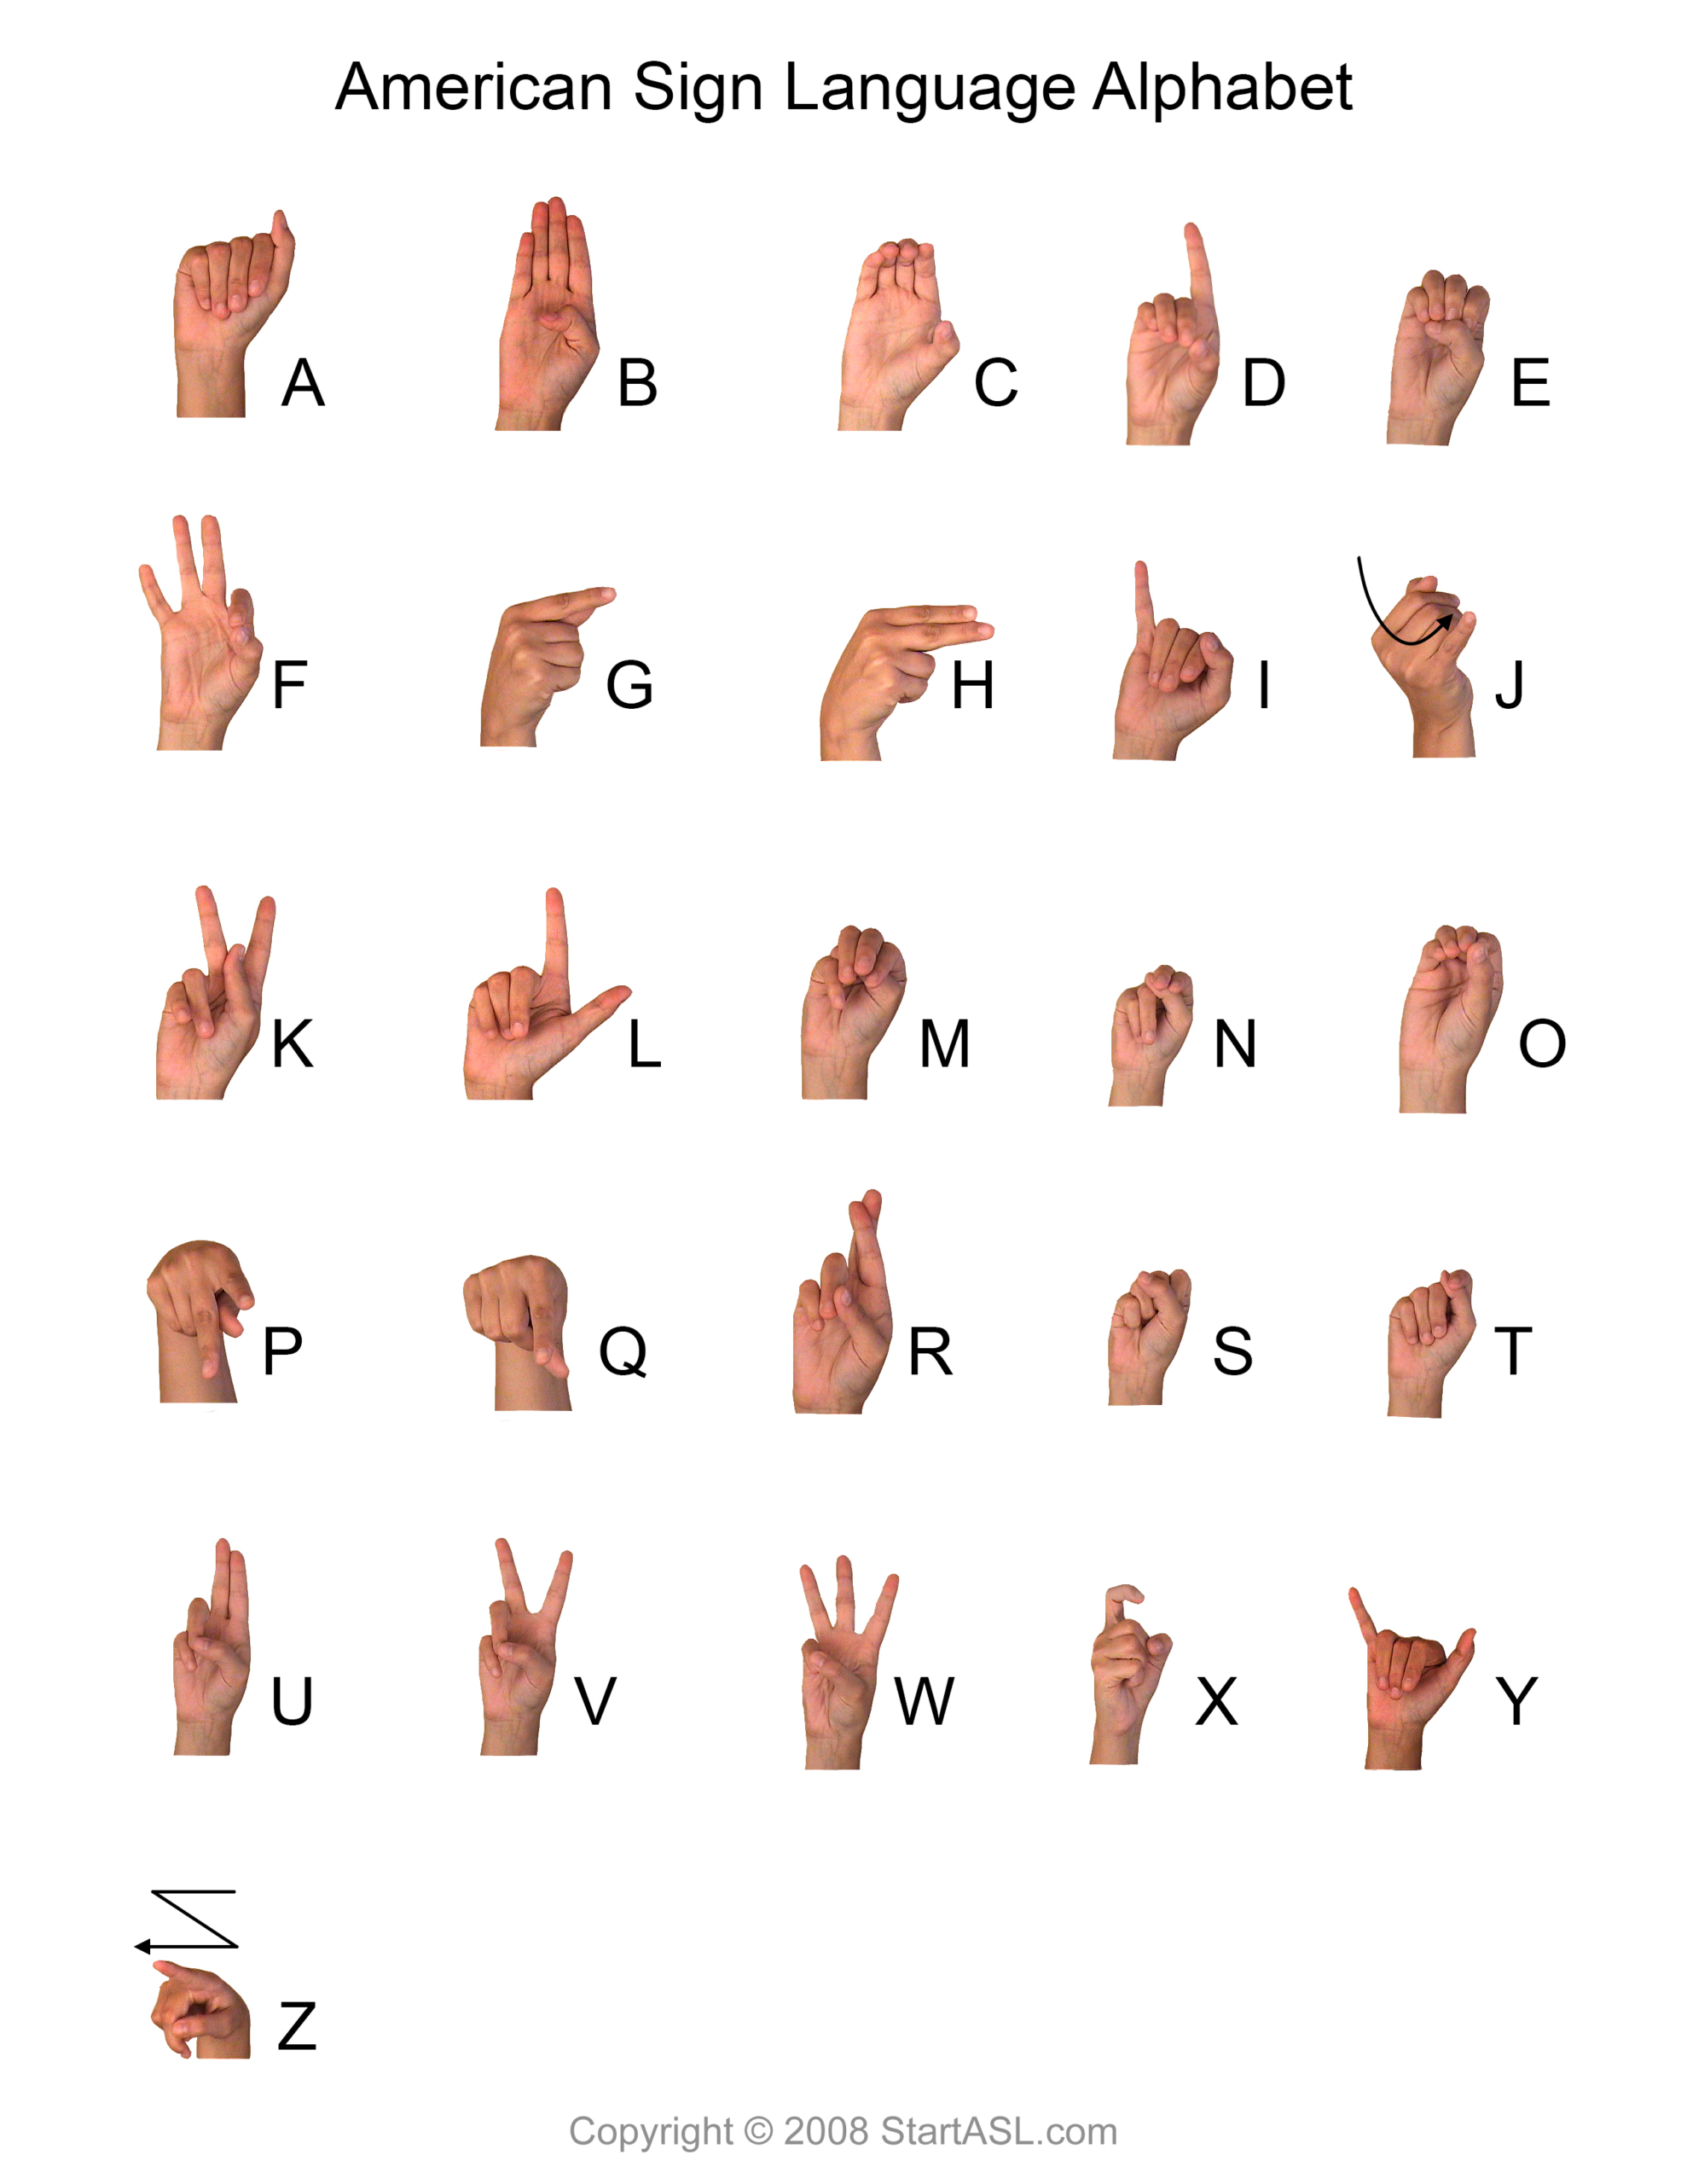 Sign Language Alphabet | 6 Free Downloads To Learn It Fast | Start Asl pertaining to Free Printable American Sign Language Alphabet